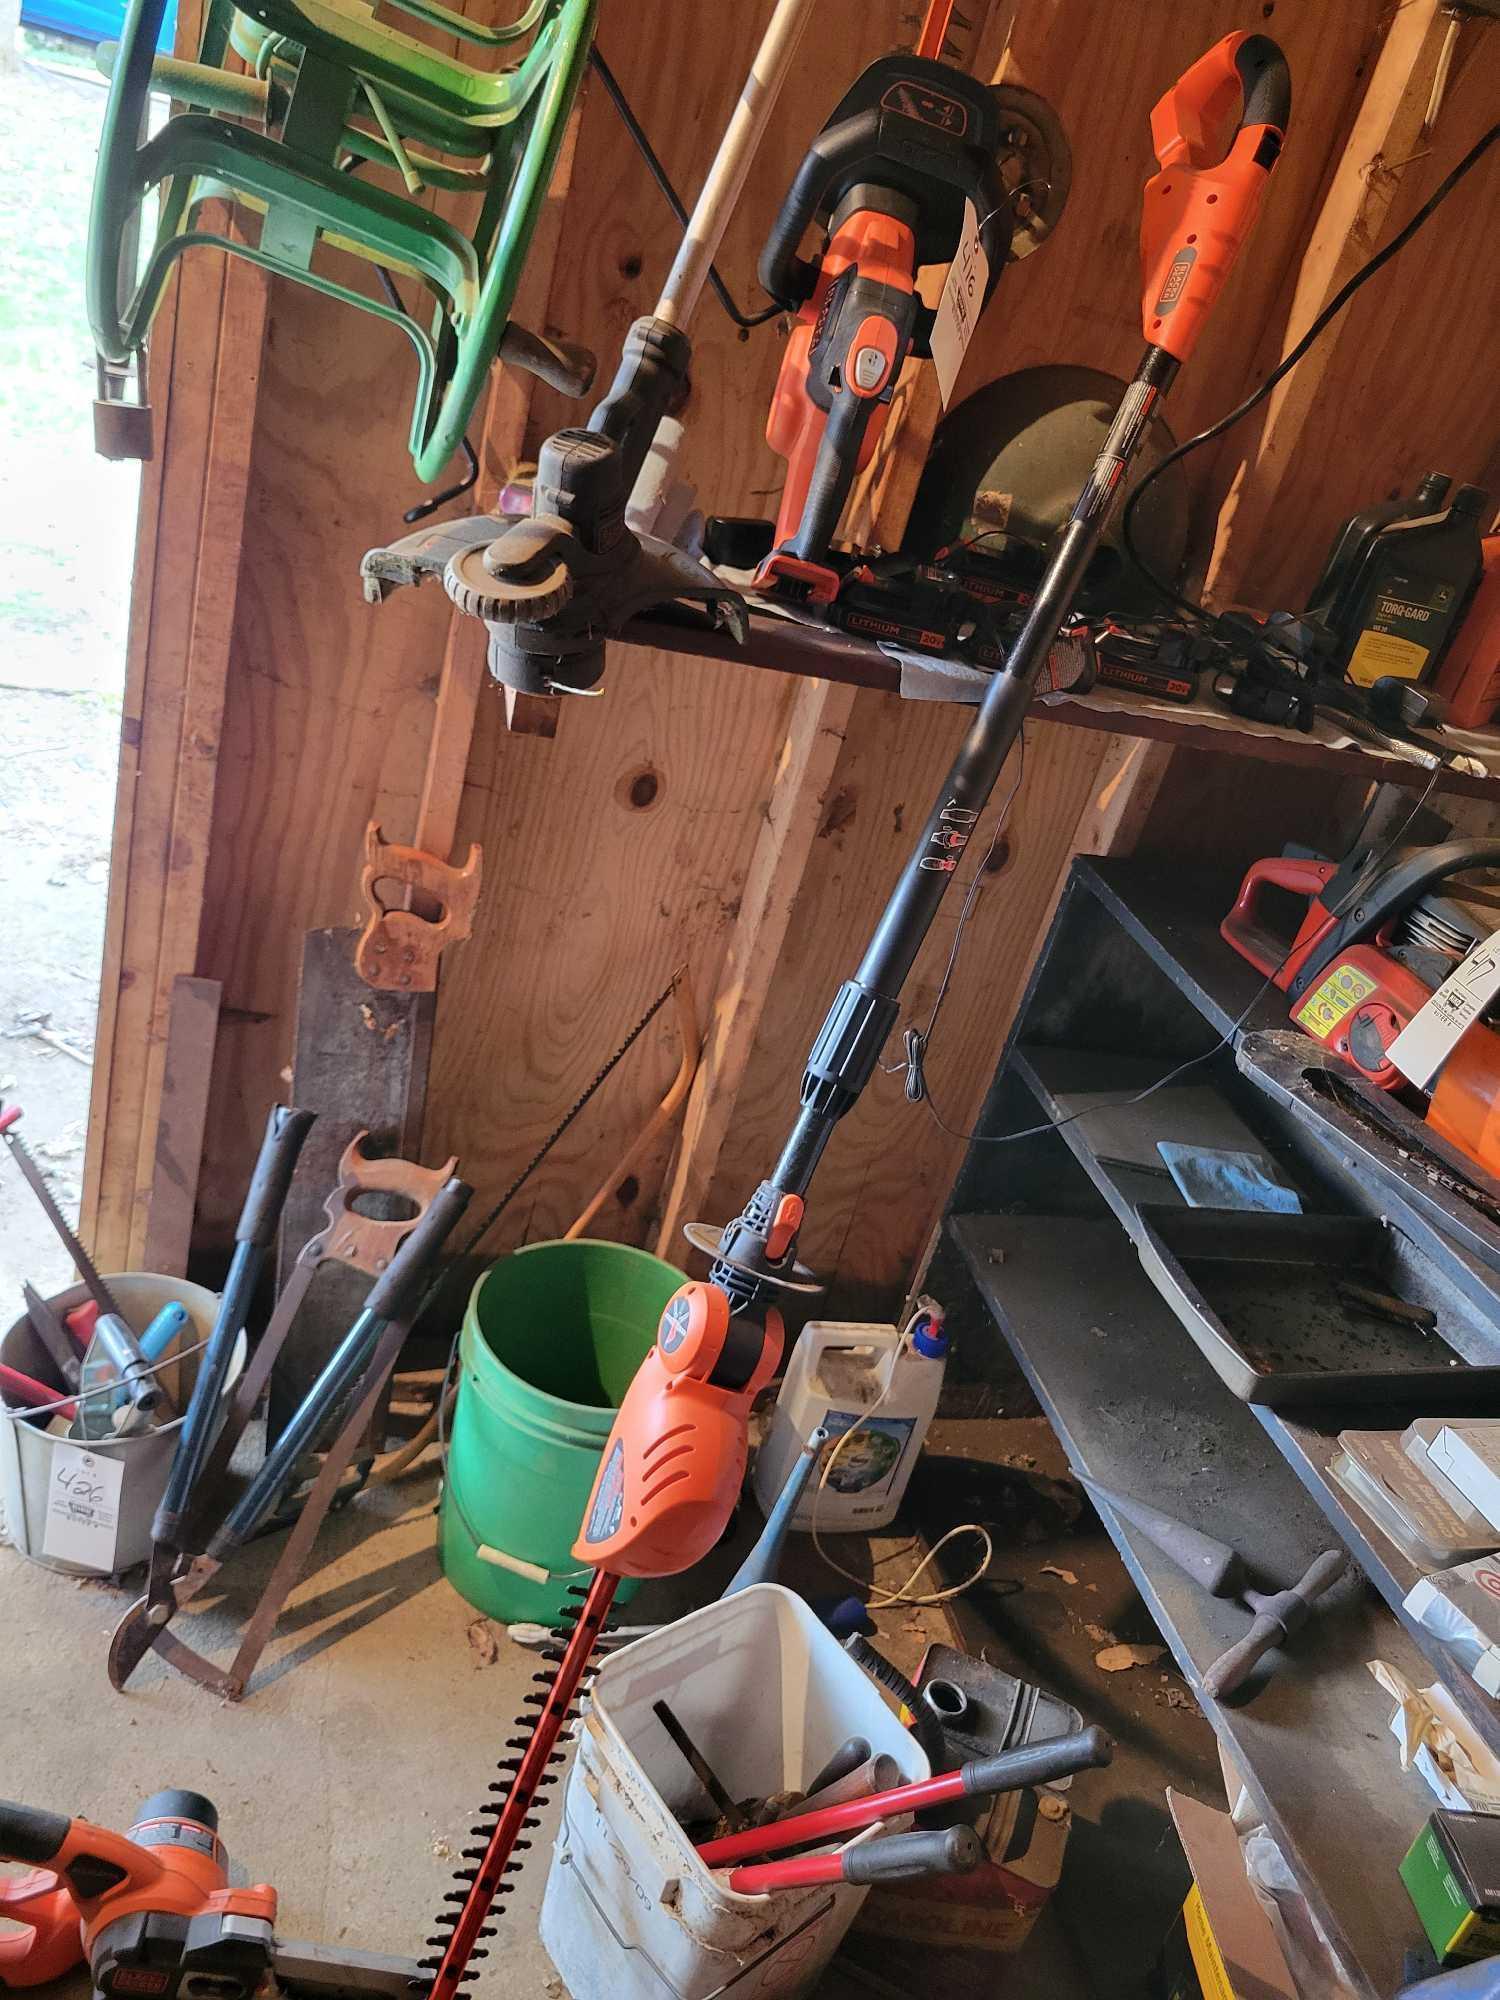 B&D trimmer, pole trimmer, "alligator", string trimmer, batteries, and chargers